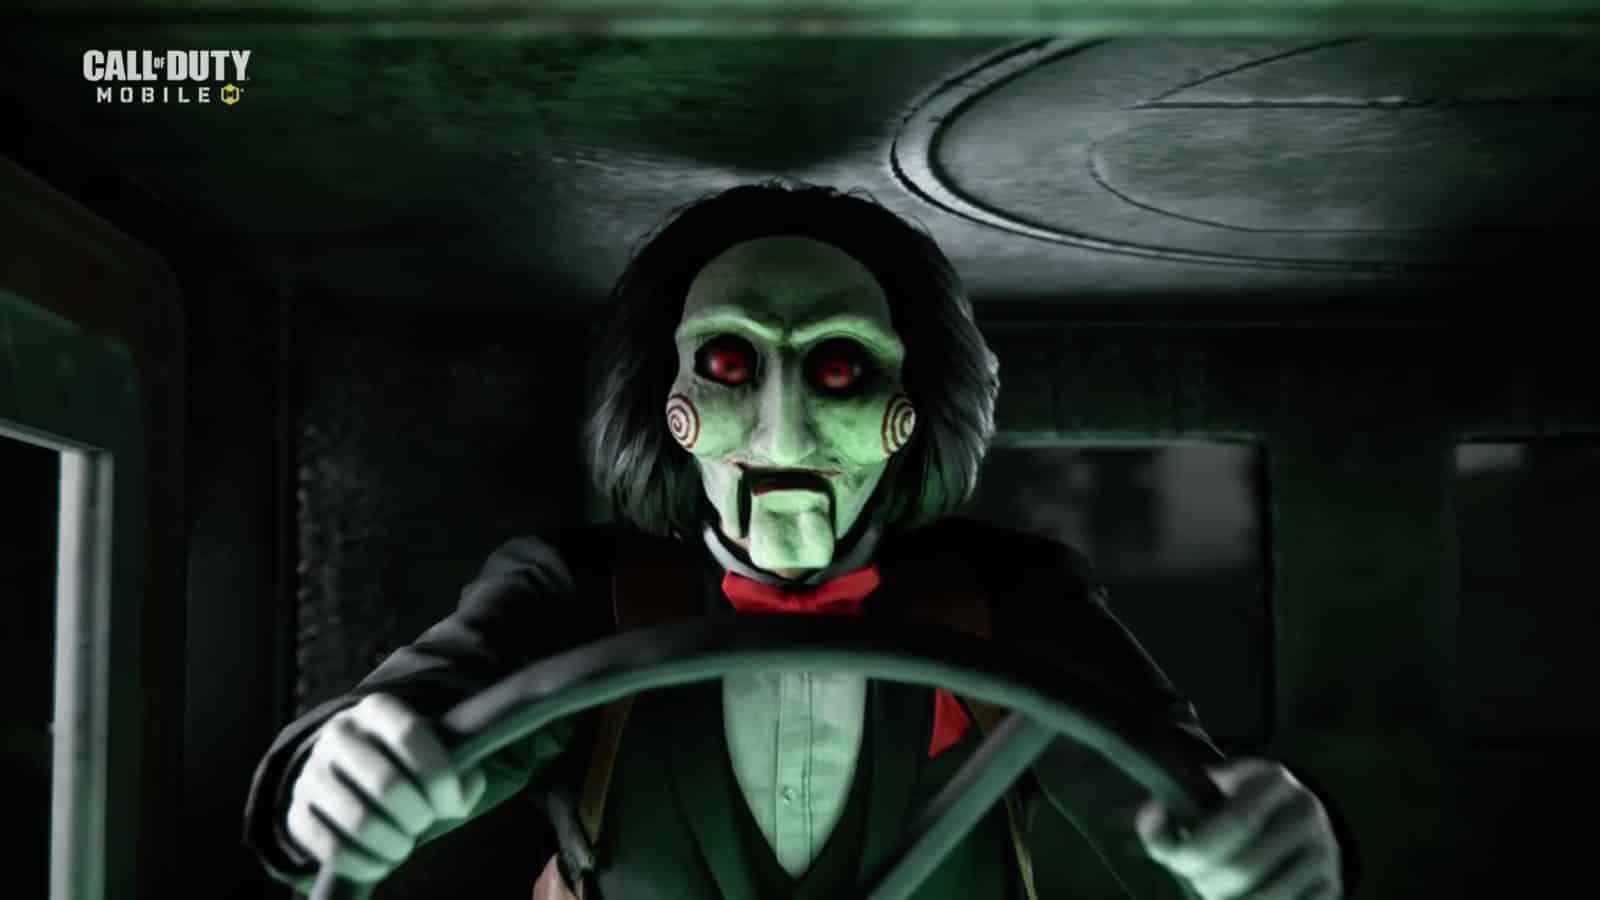 Billy the Puppet from the SAW franchise driving a truck in CoD Mobile.